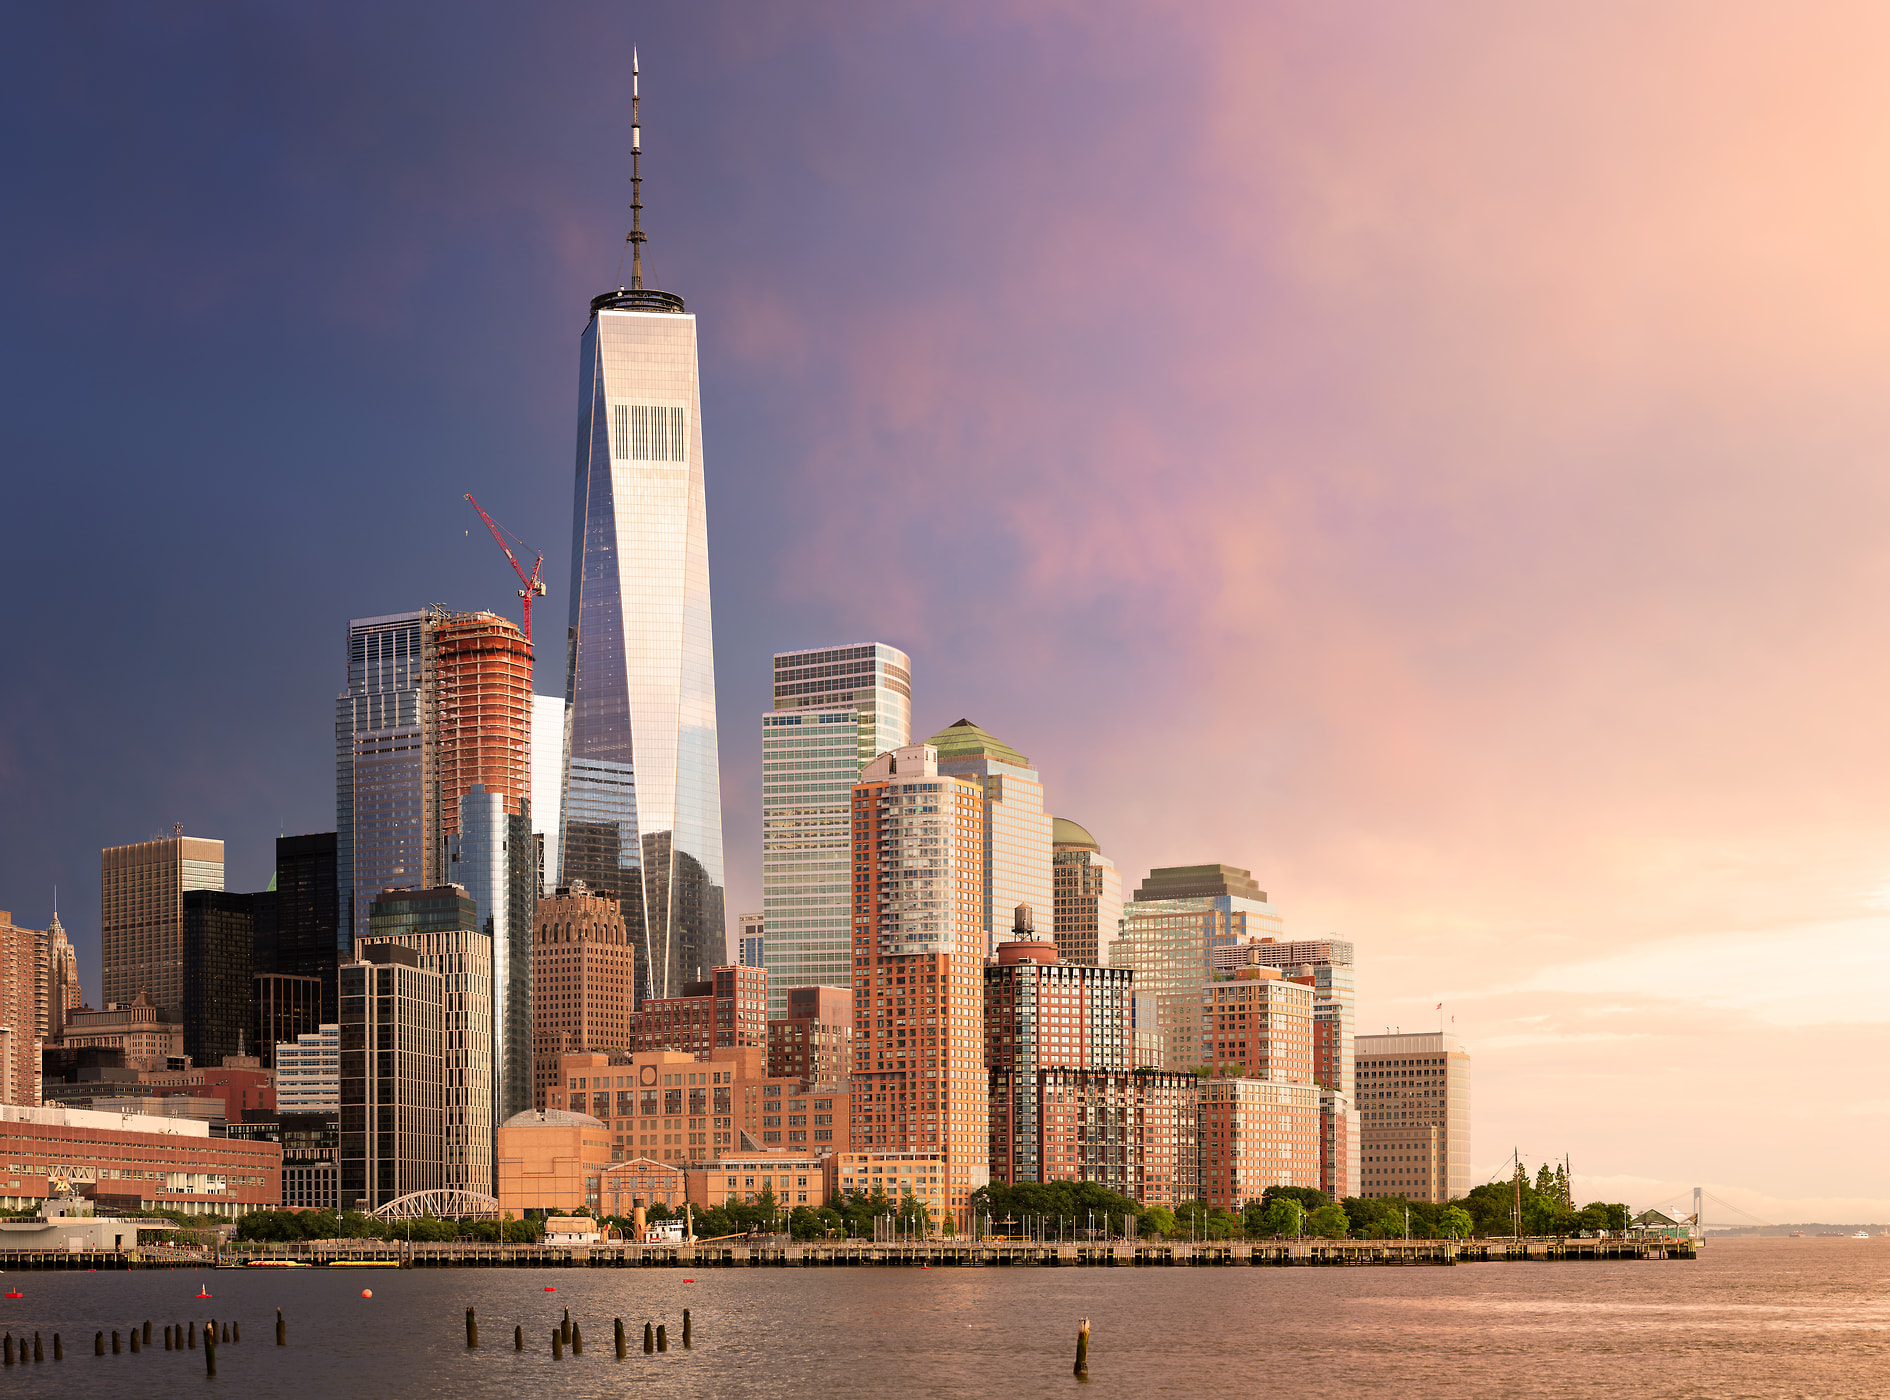 759 megapixels! A very high resolution, large-format VAST photo of the World Trade Center and Battery Park City at sunset; fine art skyline photo created by cityscape photographer Dan Piech in New York City